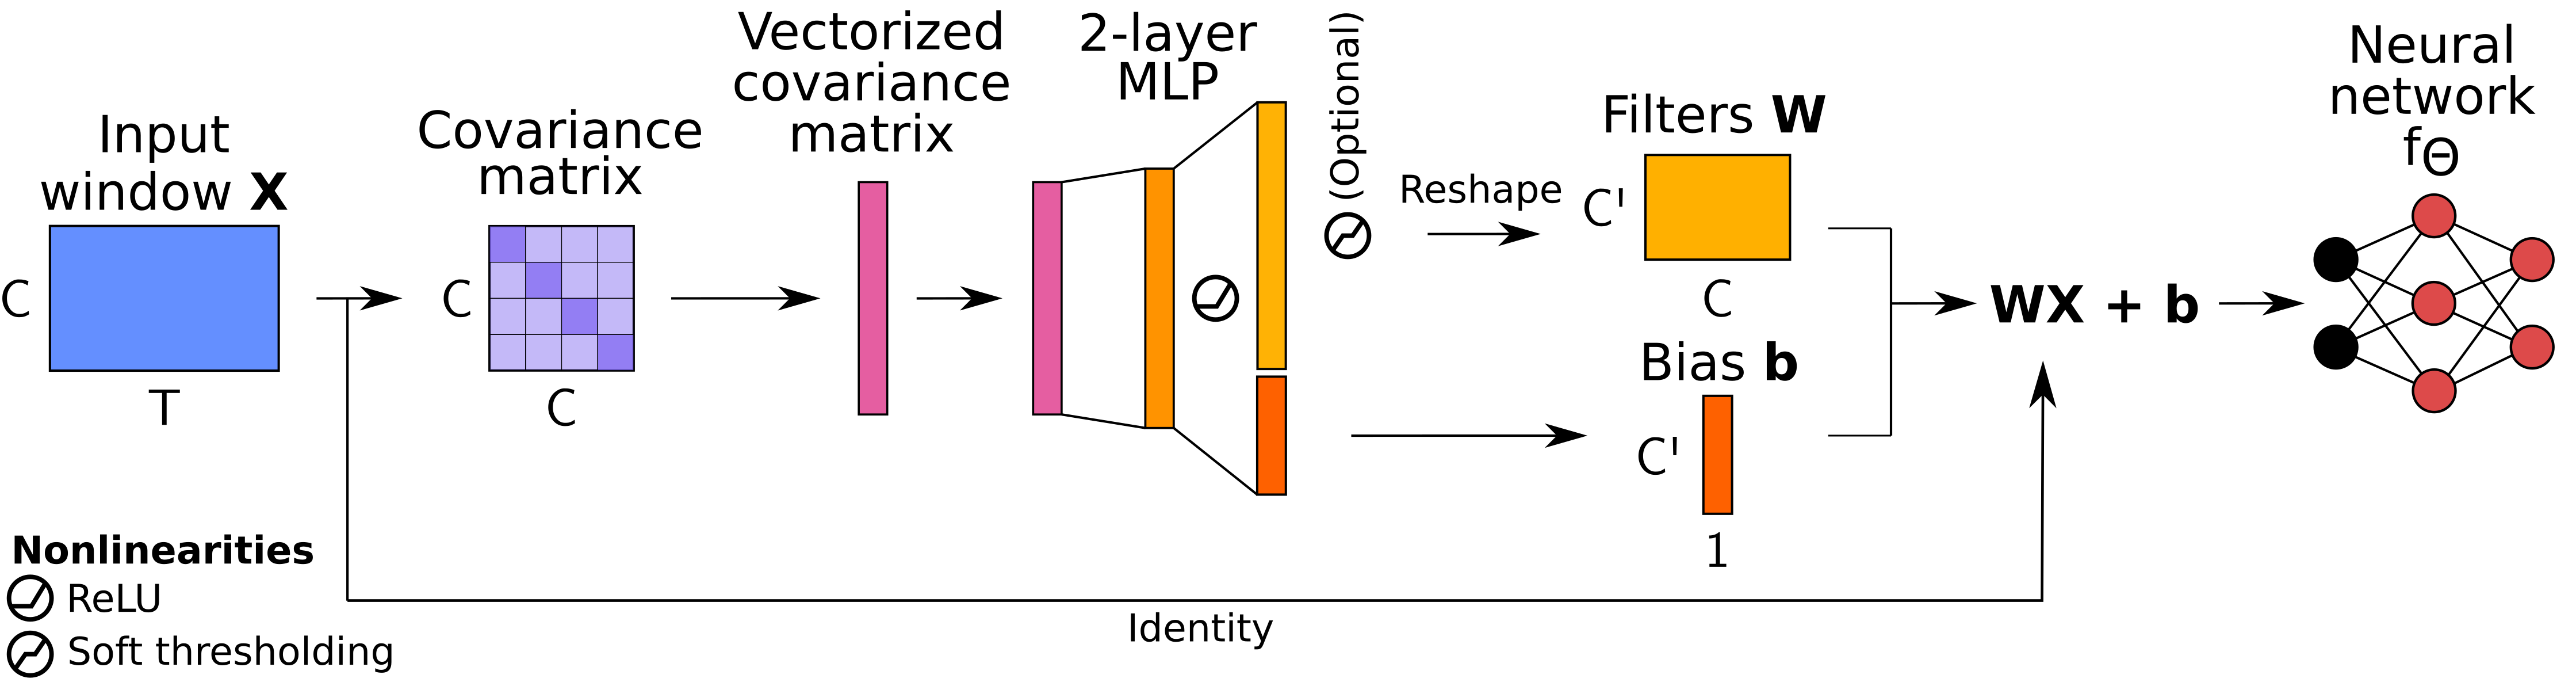 Architecture of the dynamic spatial filtering (DSF) block